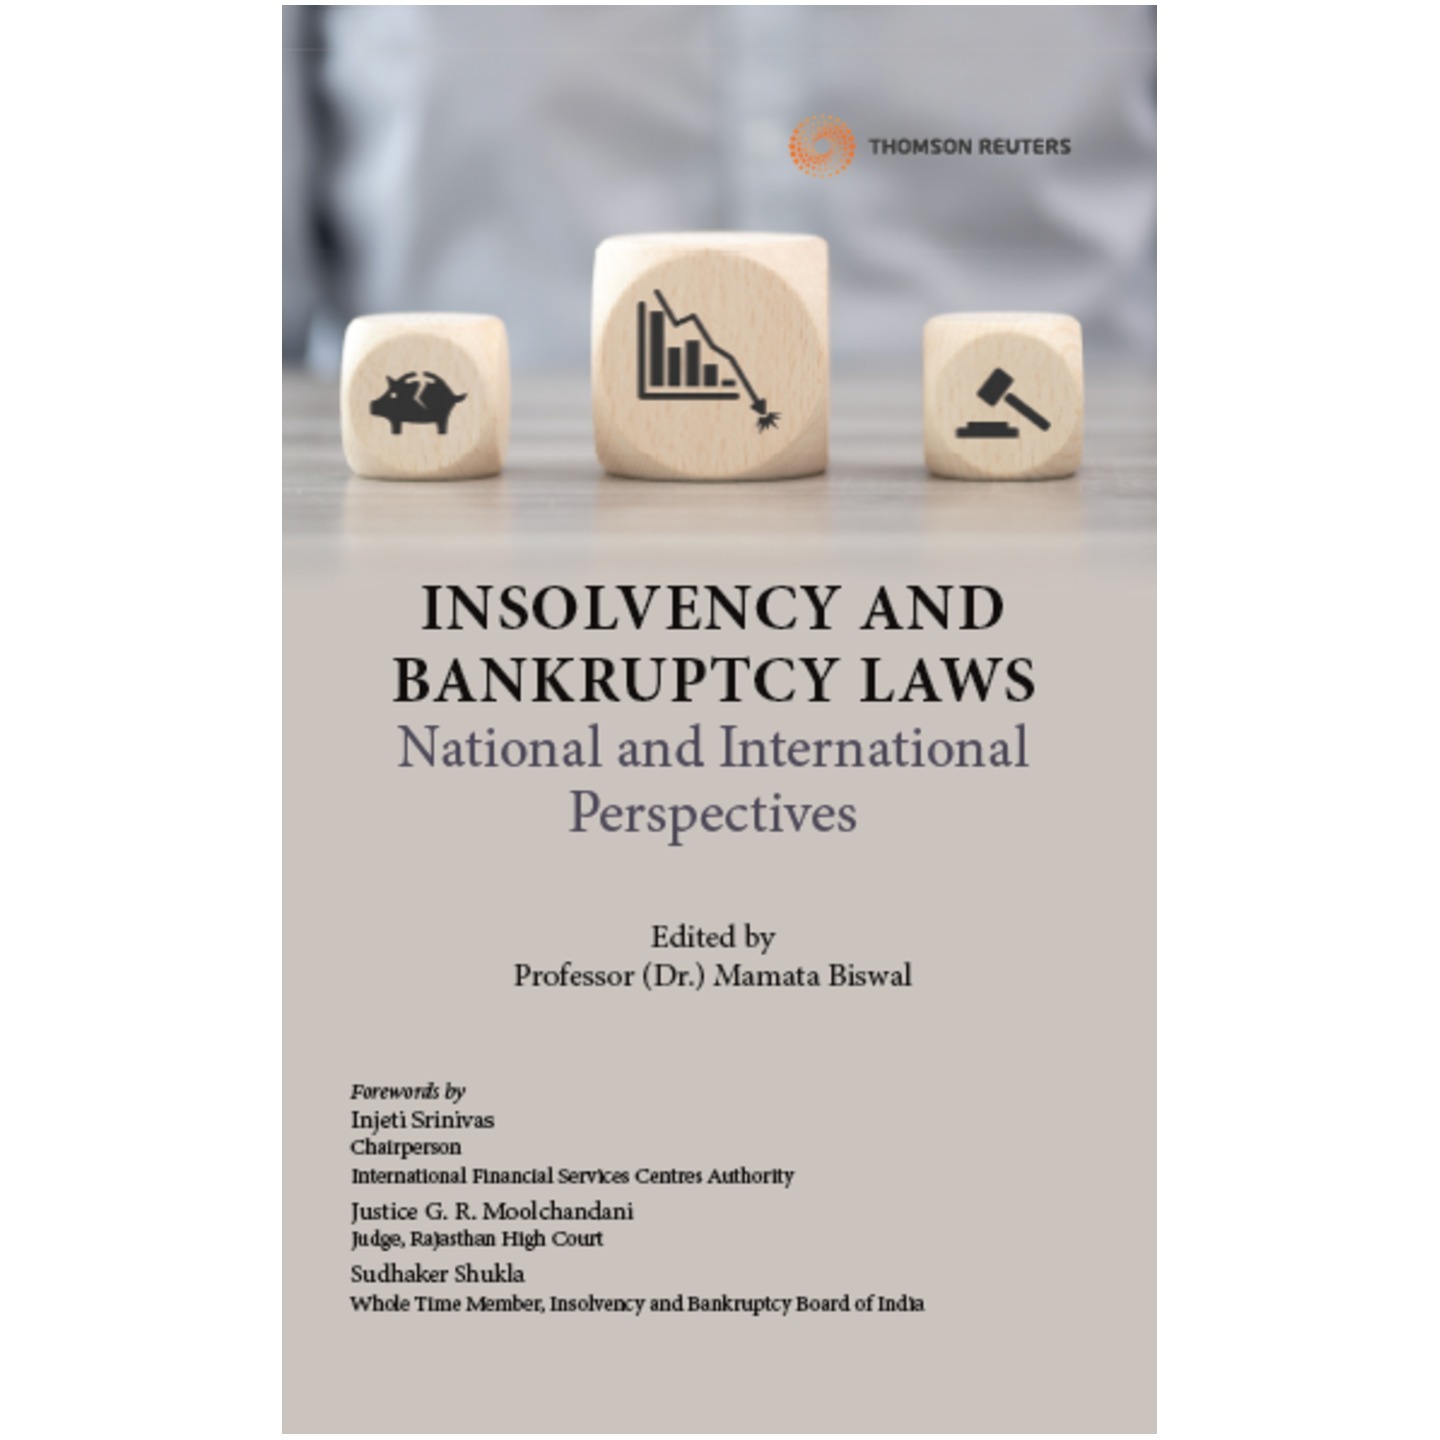 Insolvency & Bankruptcy Laws: National & International Perspectives